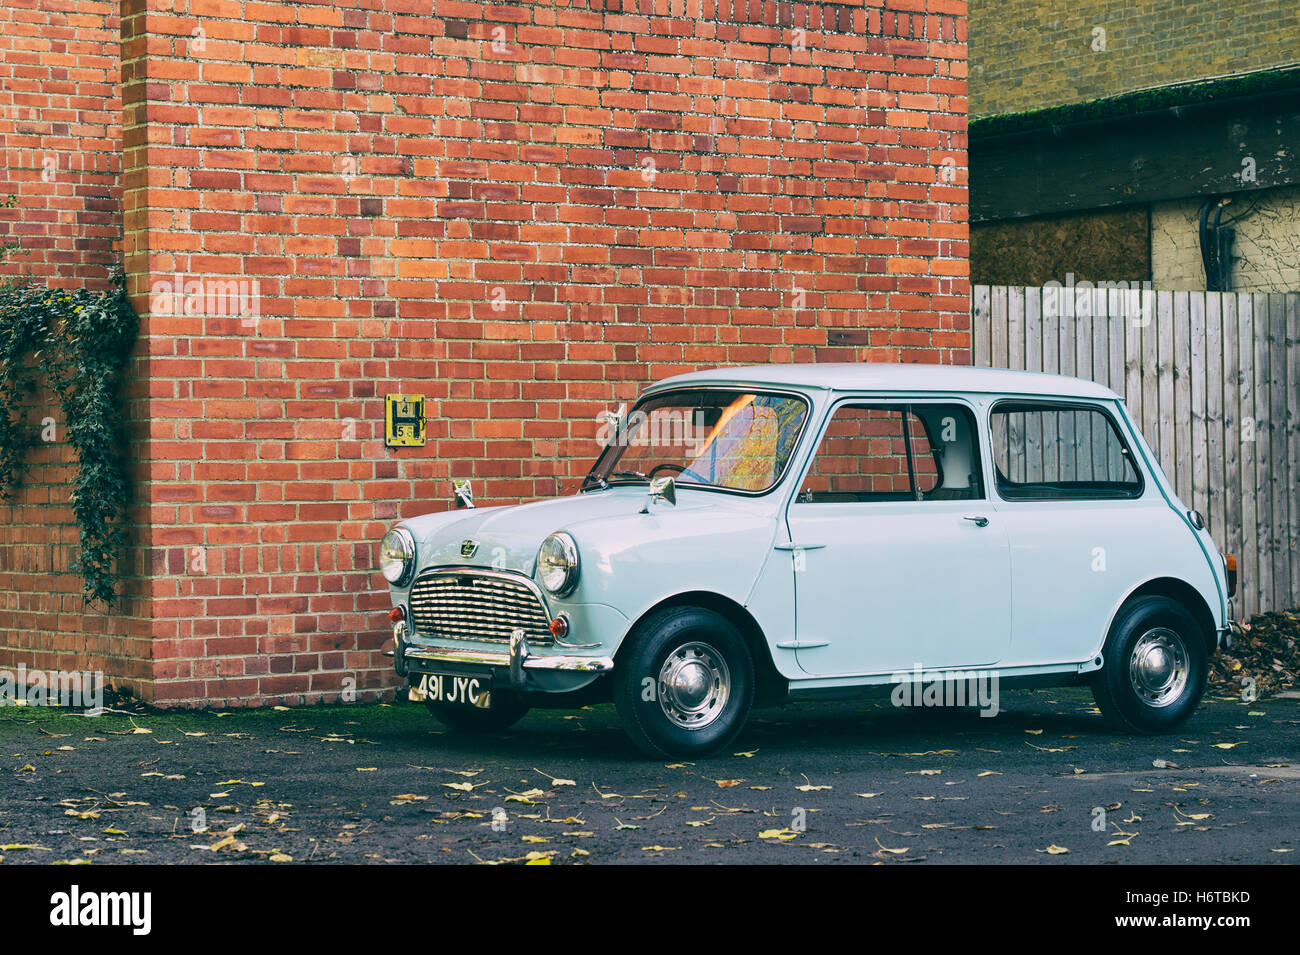 1960 Mini at Bicester Heritage Centre. Oxfordshire, England. Vintage filter applied Stock Photo